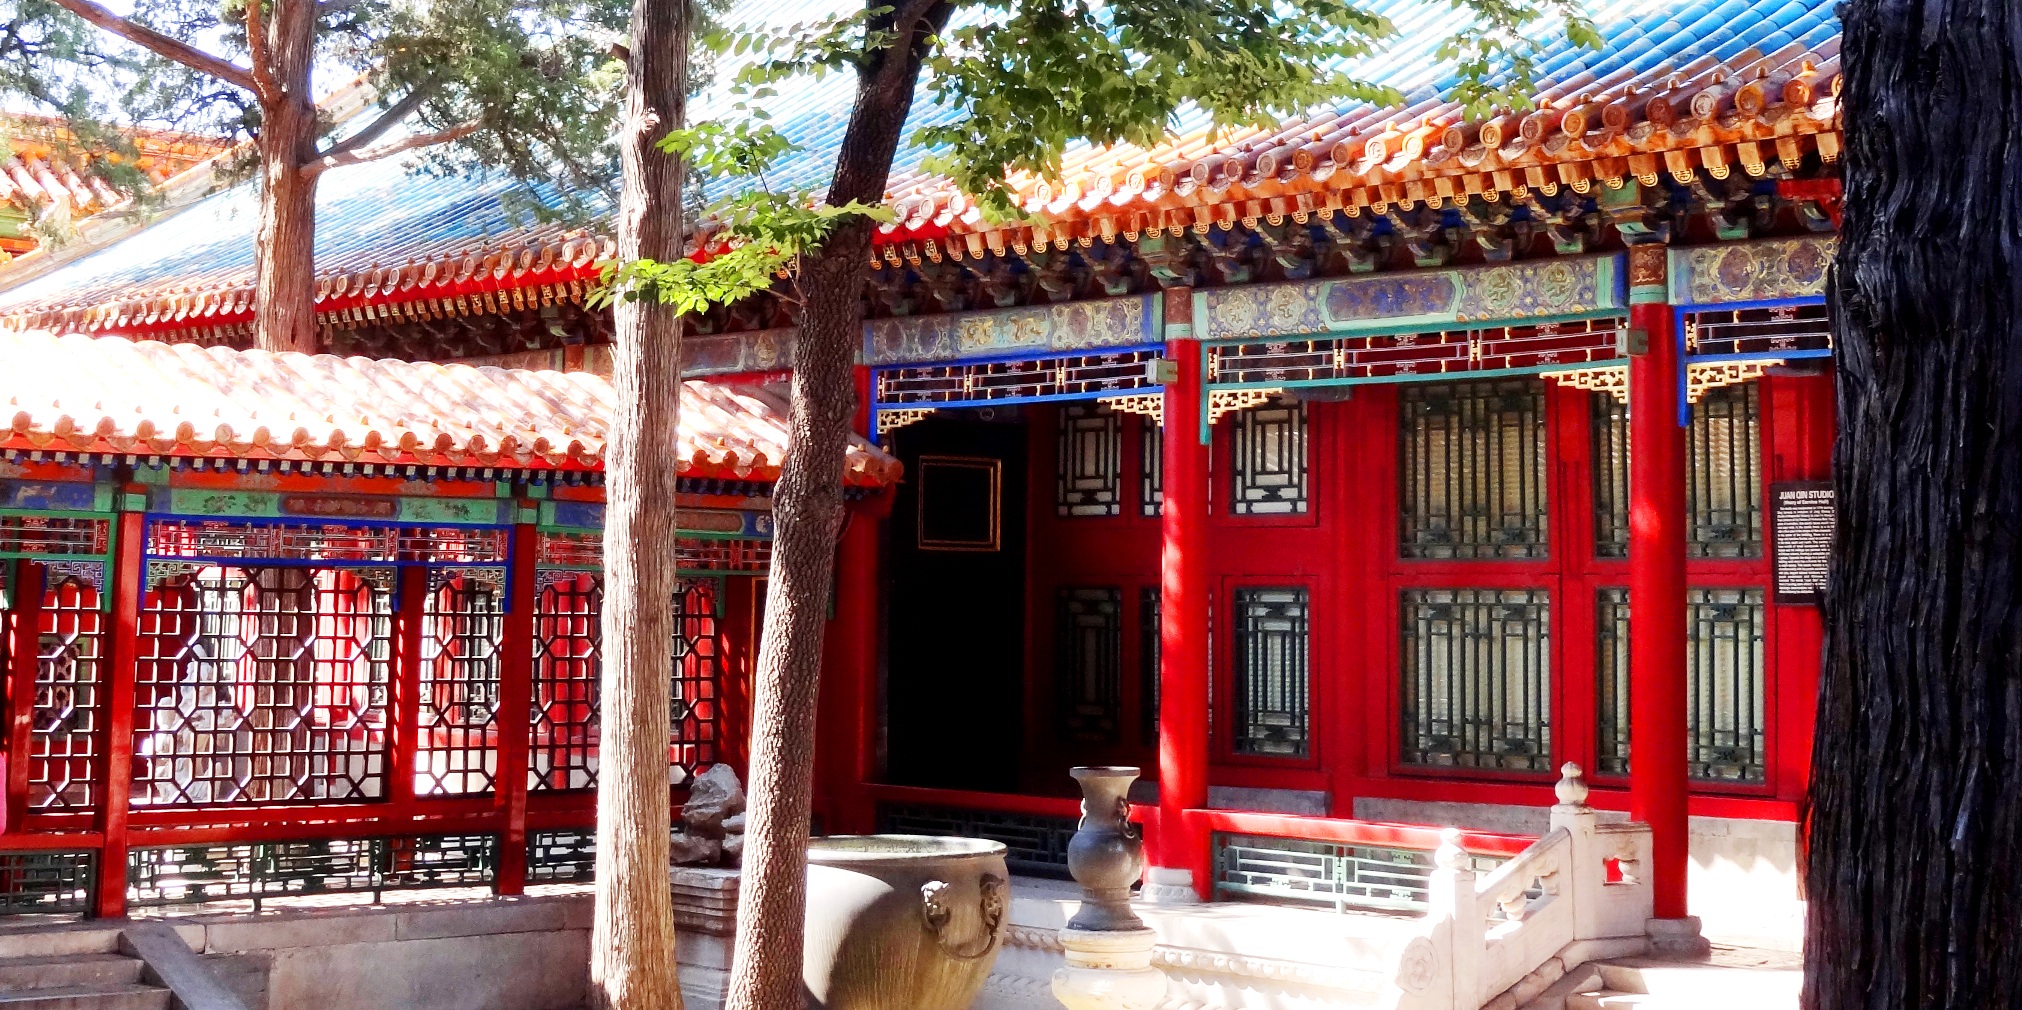 Hutongs- Traditional Ancient Living Quarters In Beijing